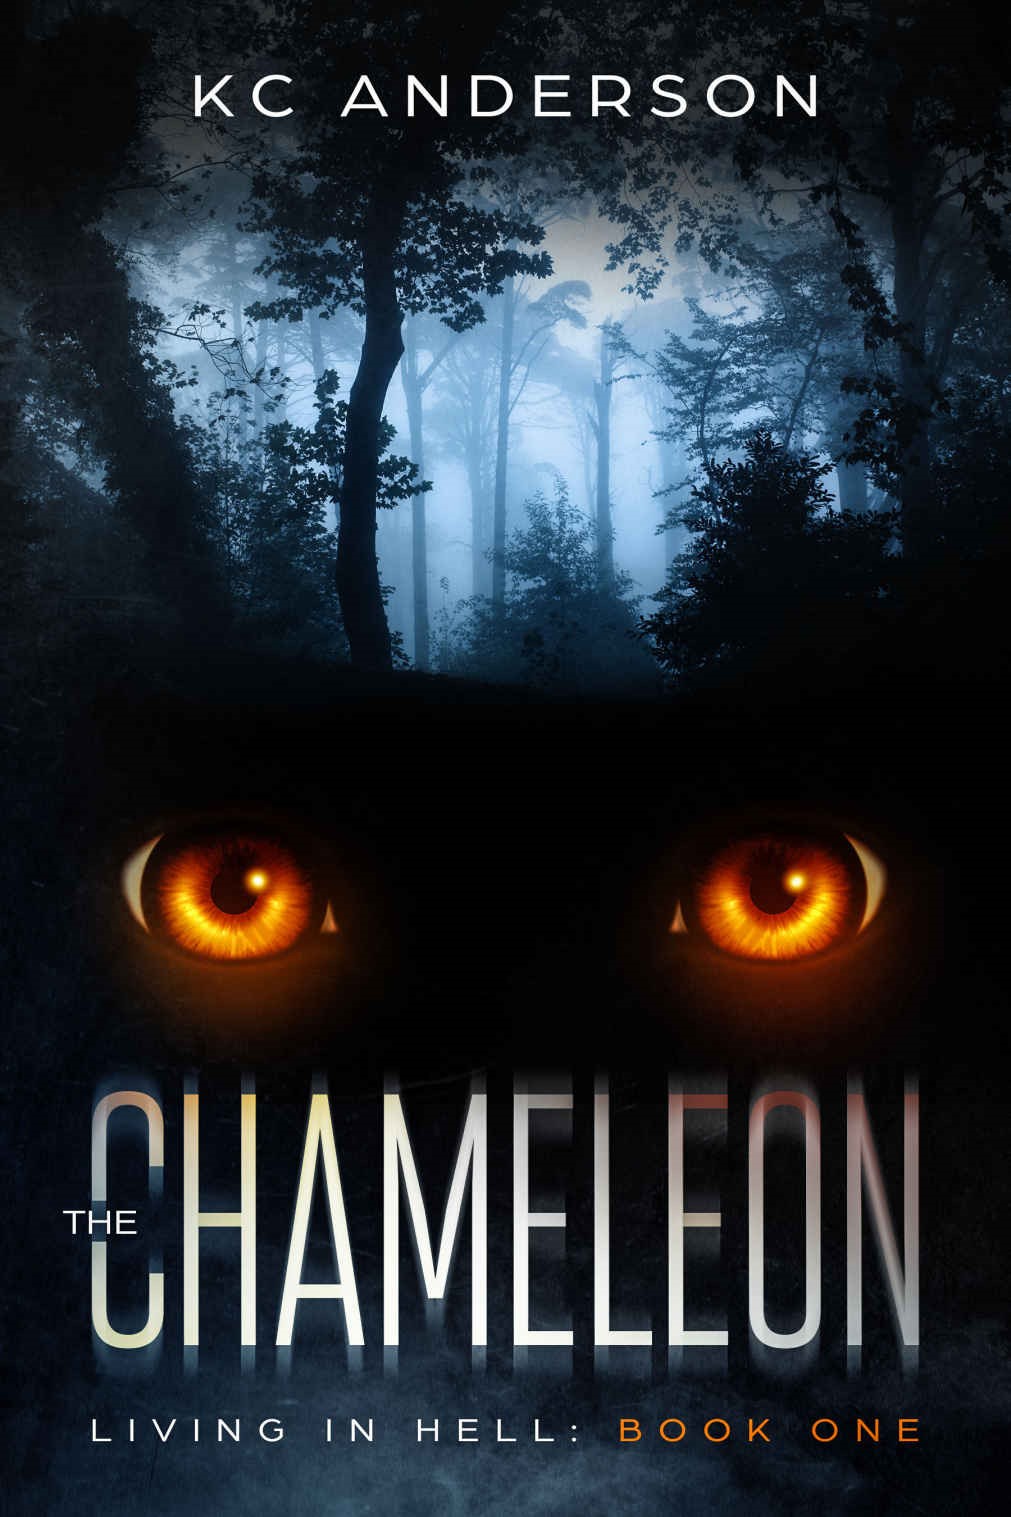 FREE: The Chameleon by KC Anderson